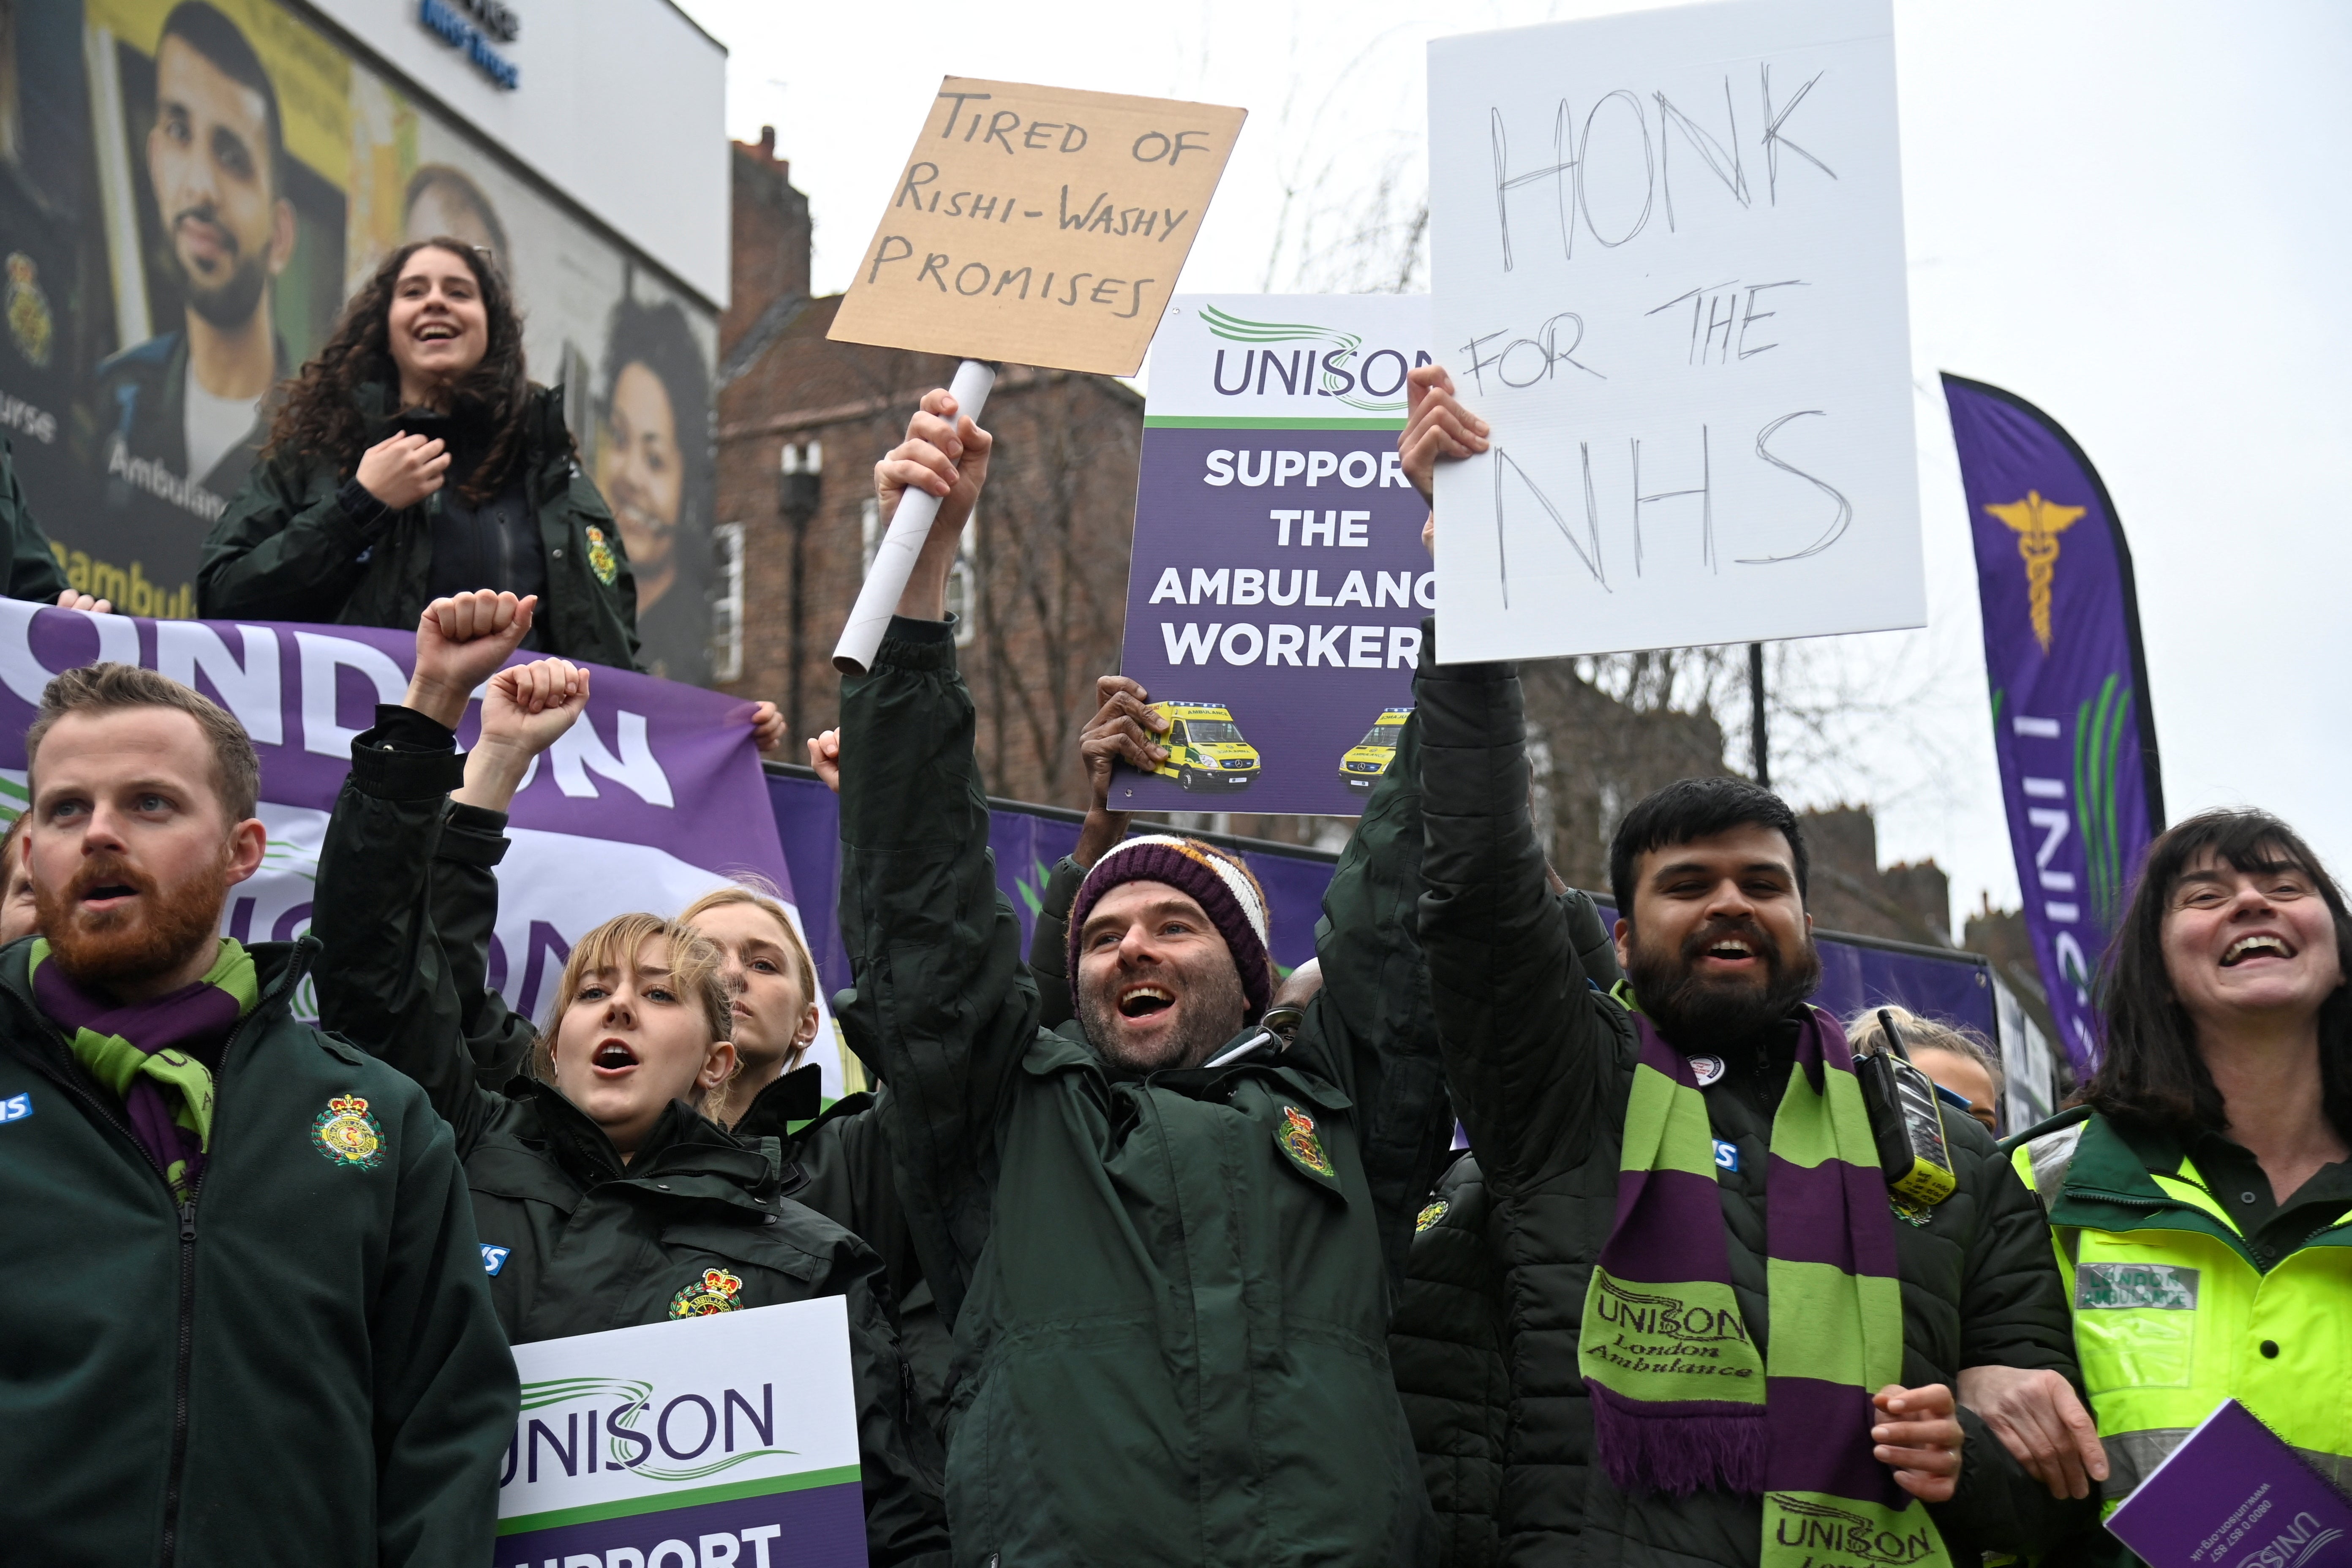 Up to 15,000 Unison ambulance workers will strike for the third time in five weeks and will be joined by 5,000 of their NHS colleagues at two hospital trusts in Liverpool